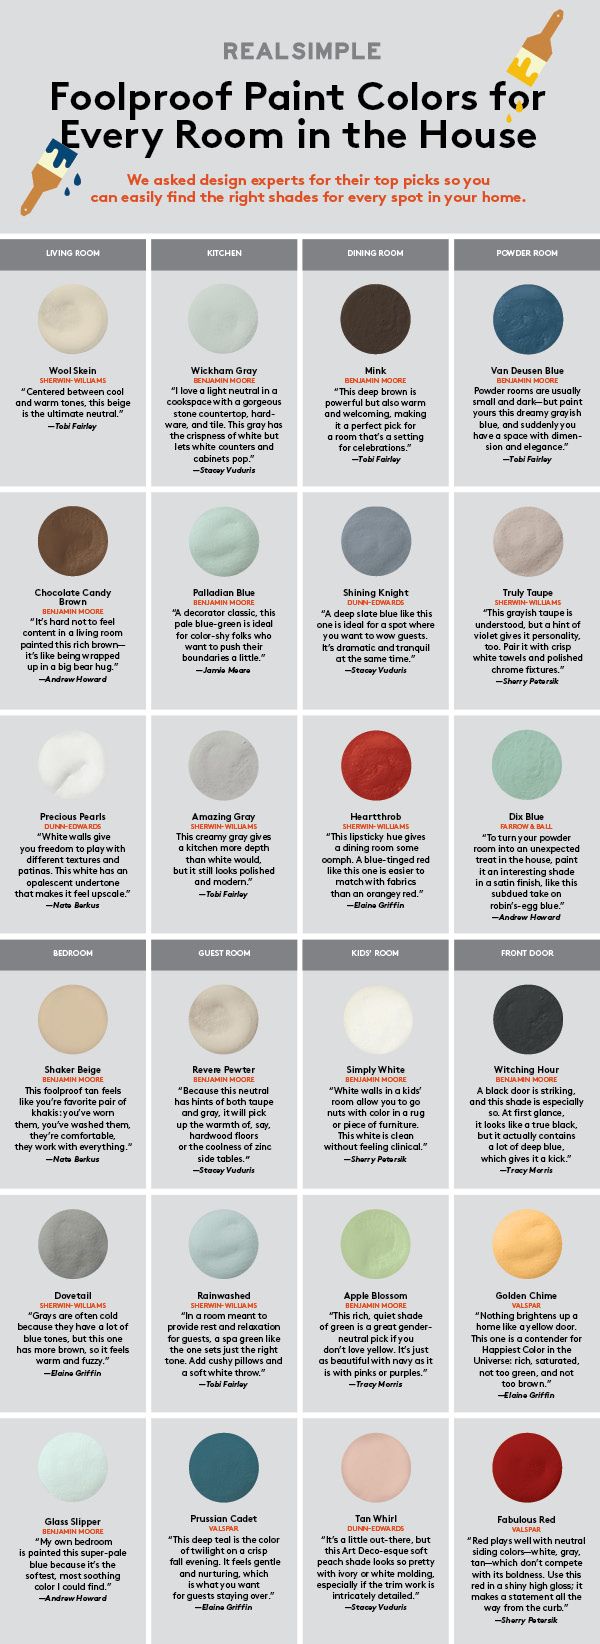 How to Choose the Perfect Paint Color for Every Room in Your House